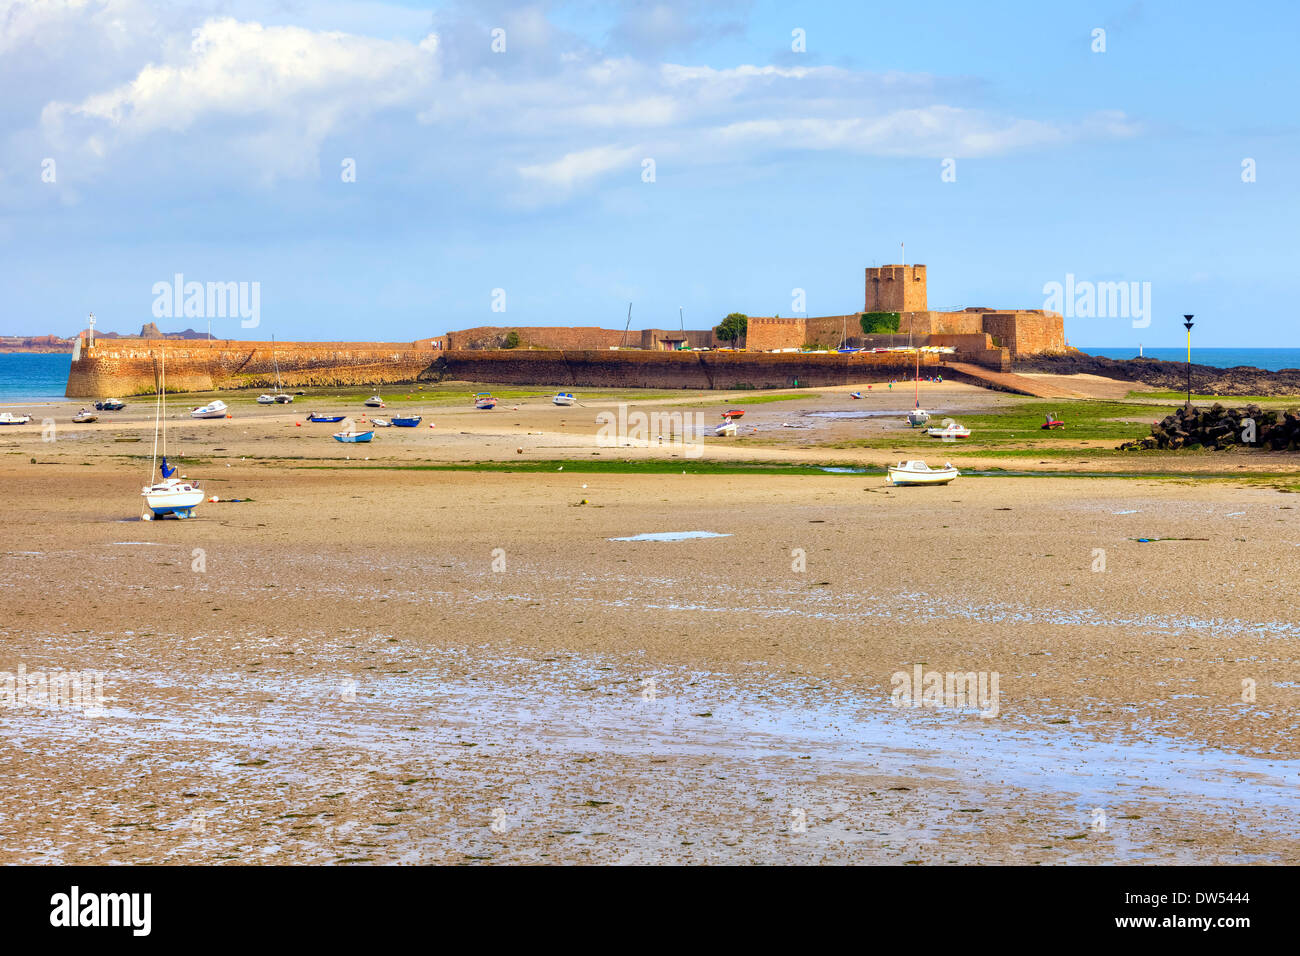 St Aubins Fort Jersey High Resolution Stock Photography and Images - Alamy